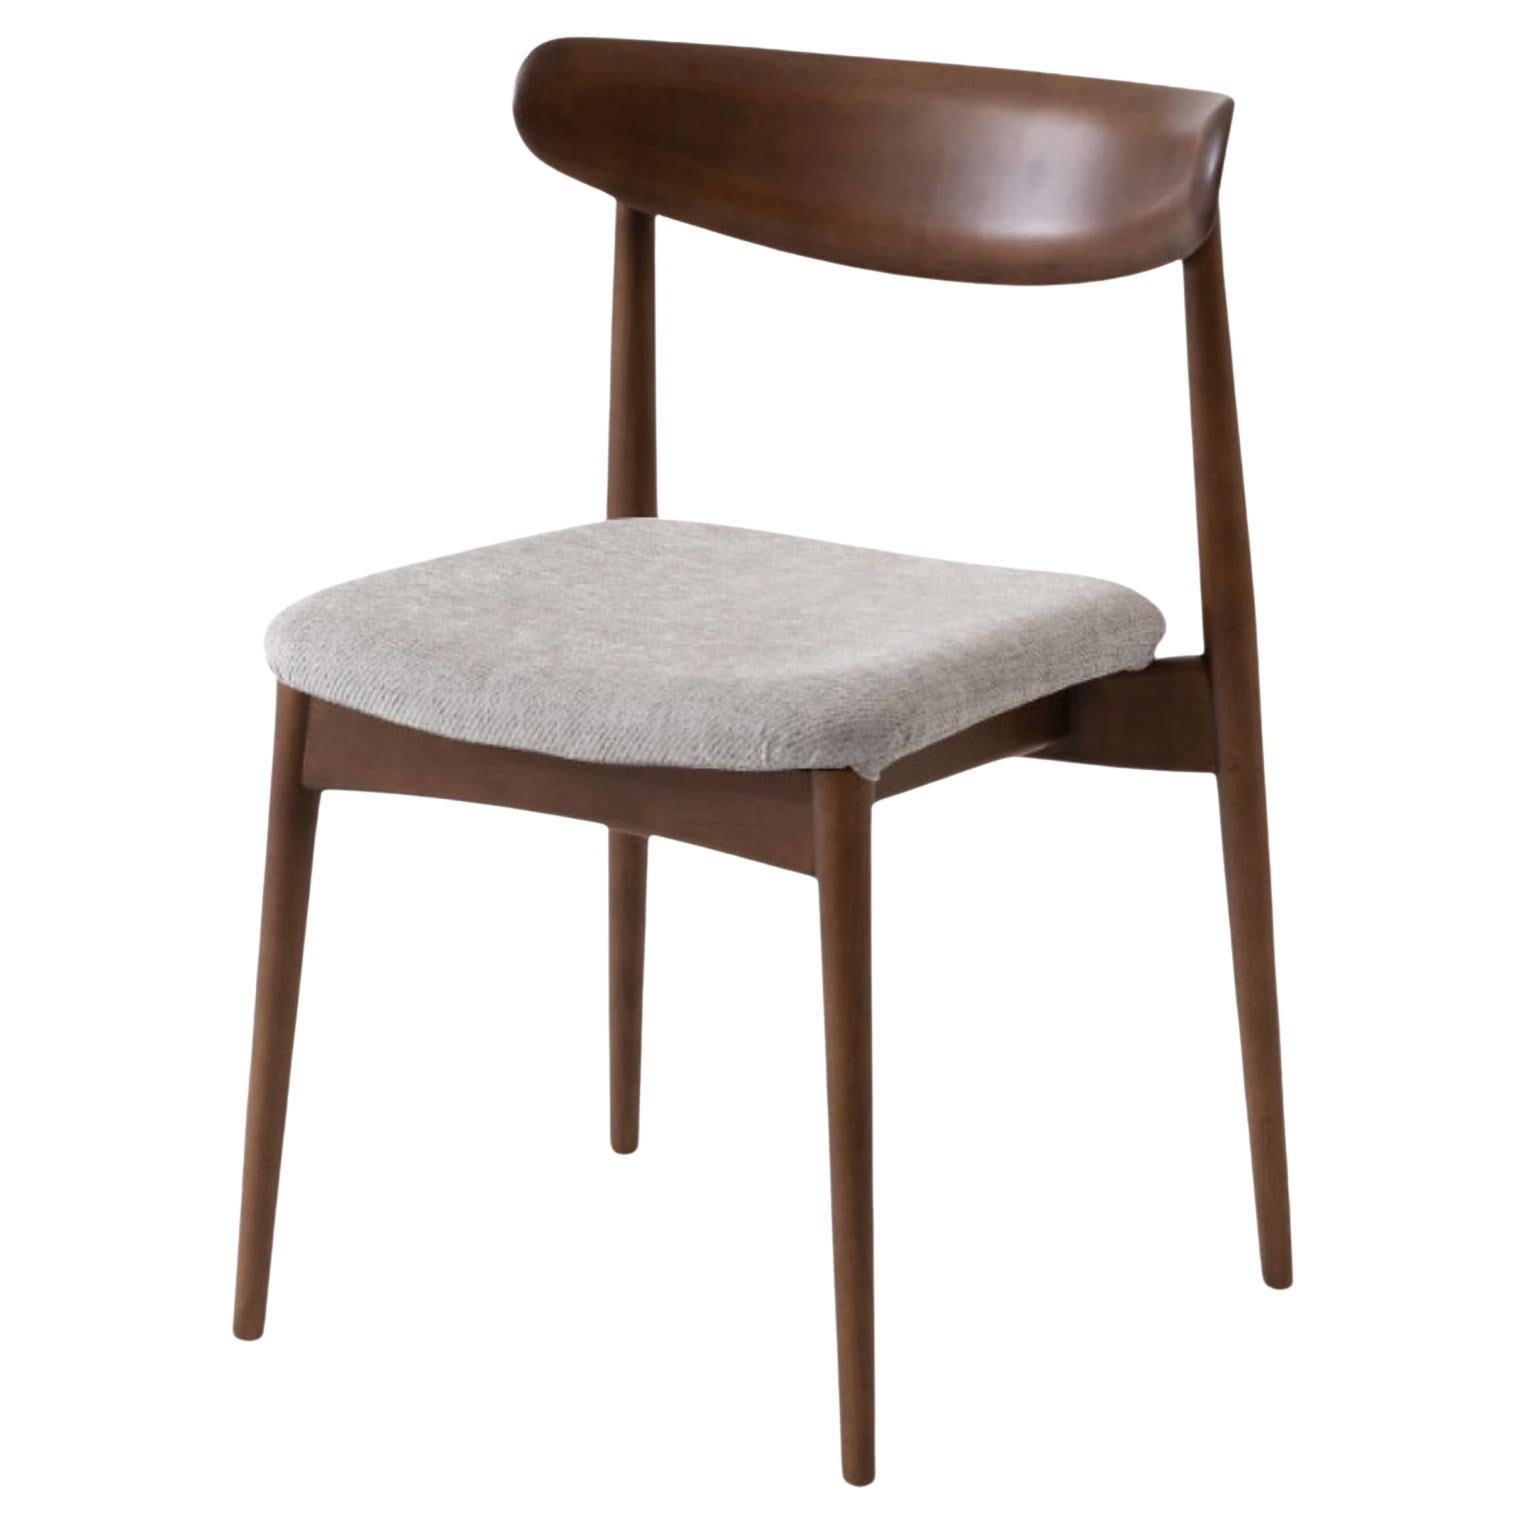 Motomi Kawakami 'Seoto KD201' Dining Chair in Walnut and Upholstery for Hida For Sale